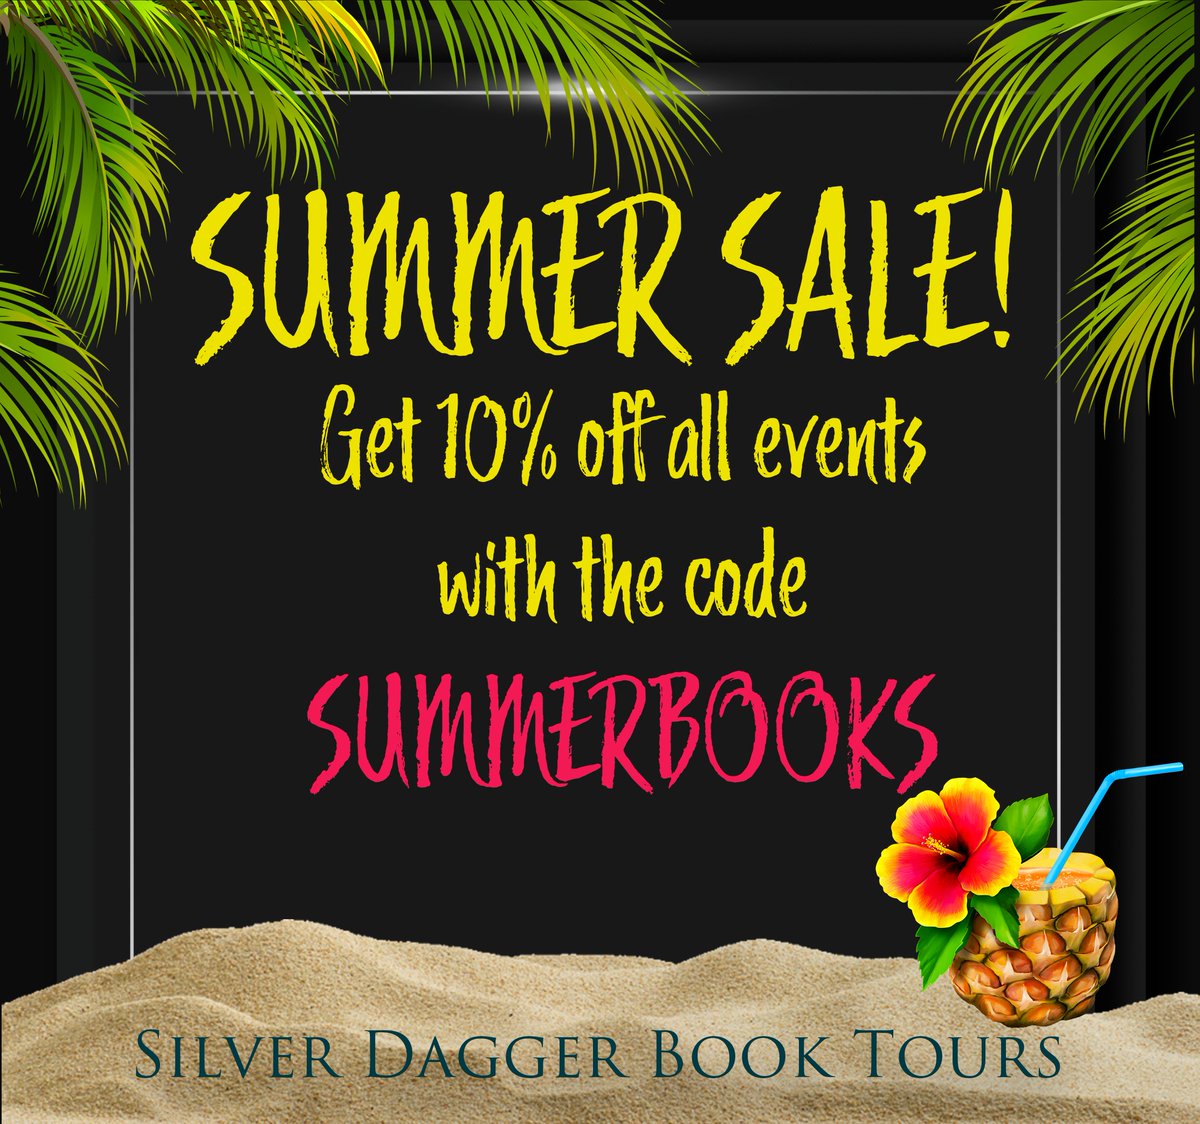 ☀🌸SUMMER SPECIAL!🌸☀
Use the code
SUMMERBOOKS
to get 10% off all events!
bit.ly/SDBookATour
#BookTour #authorpromotion #BookPromotion
#reading #booklovers #booktok #bookbuzz #BookBoost #bookblogger #bookstagram #bookish #bookclub #MustRead #writersofinstagram  #BookTour